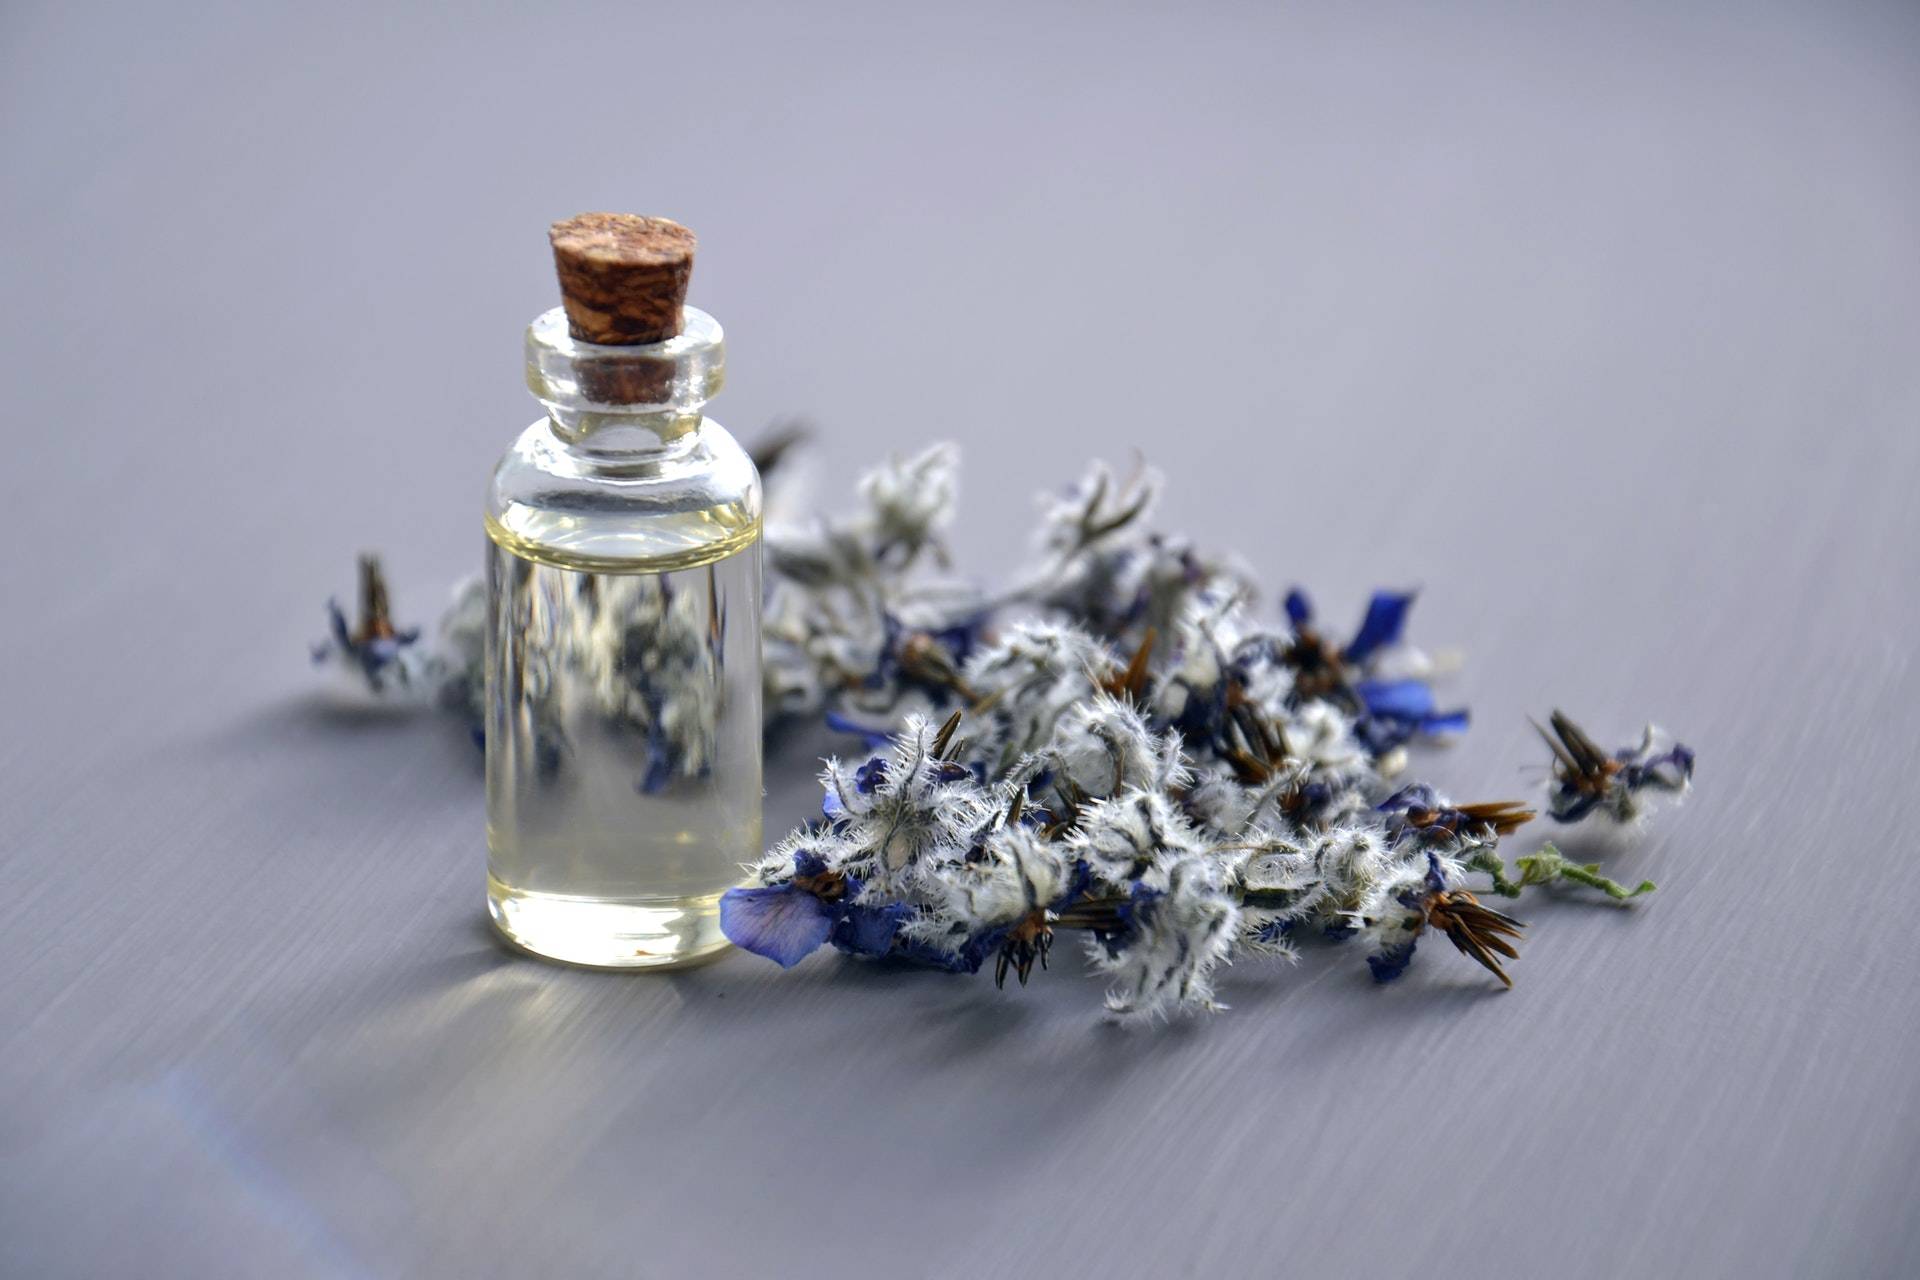 Image of a vial of essential oils and a sprig of lavender on a light purple surface